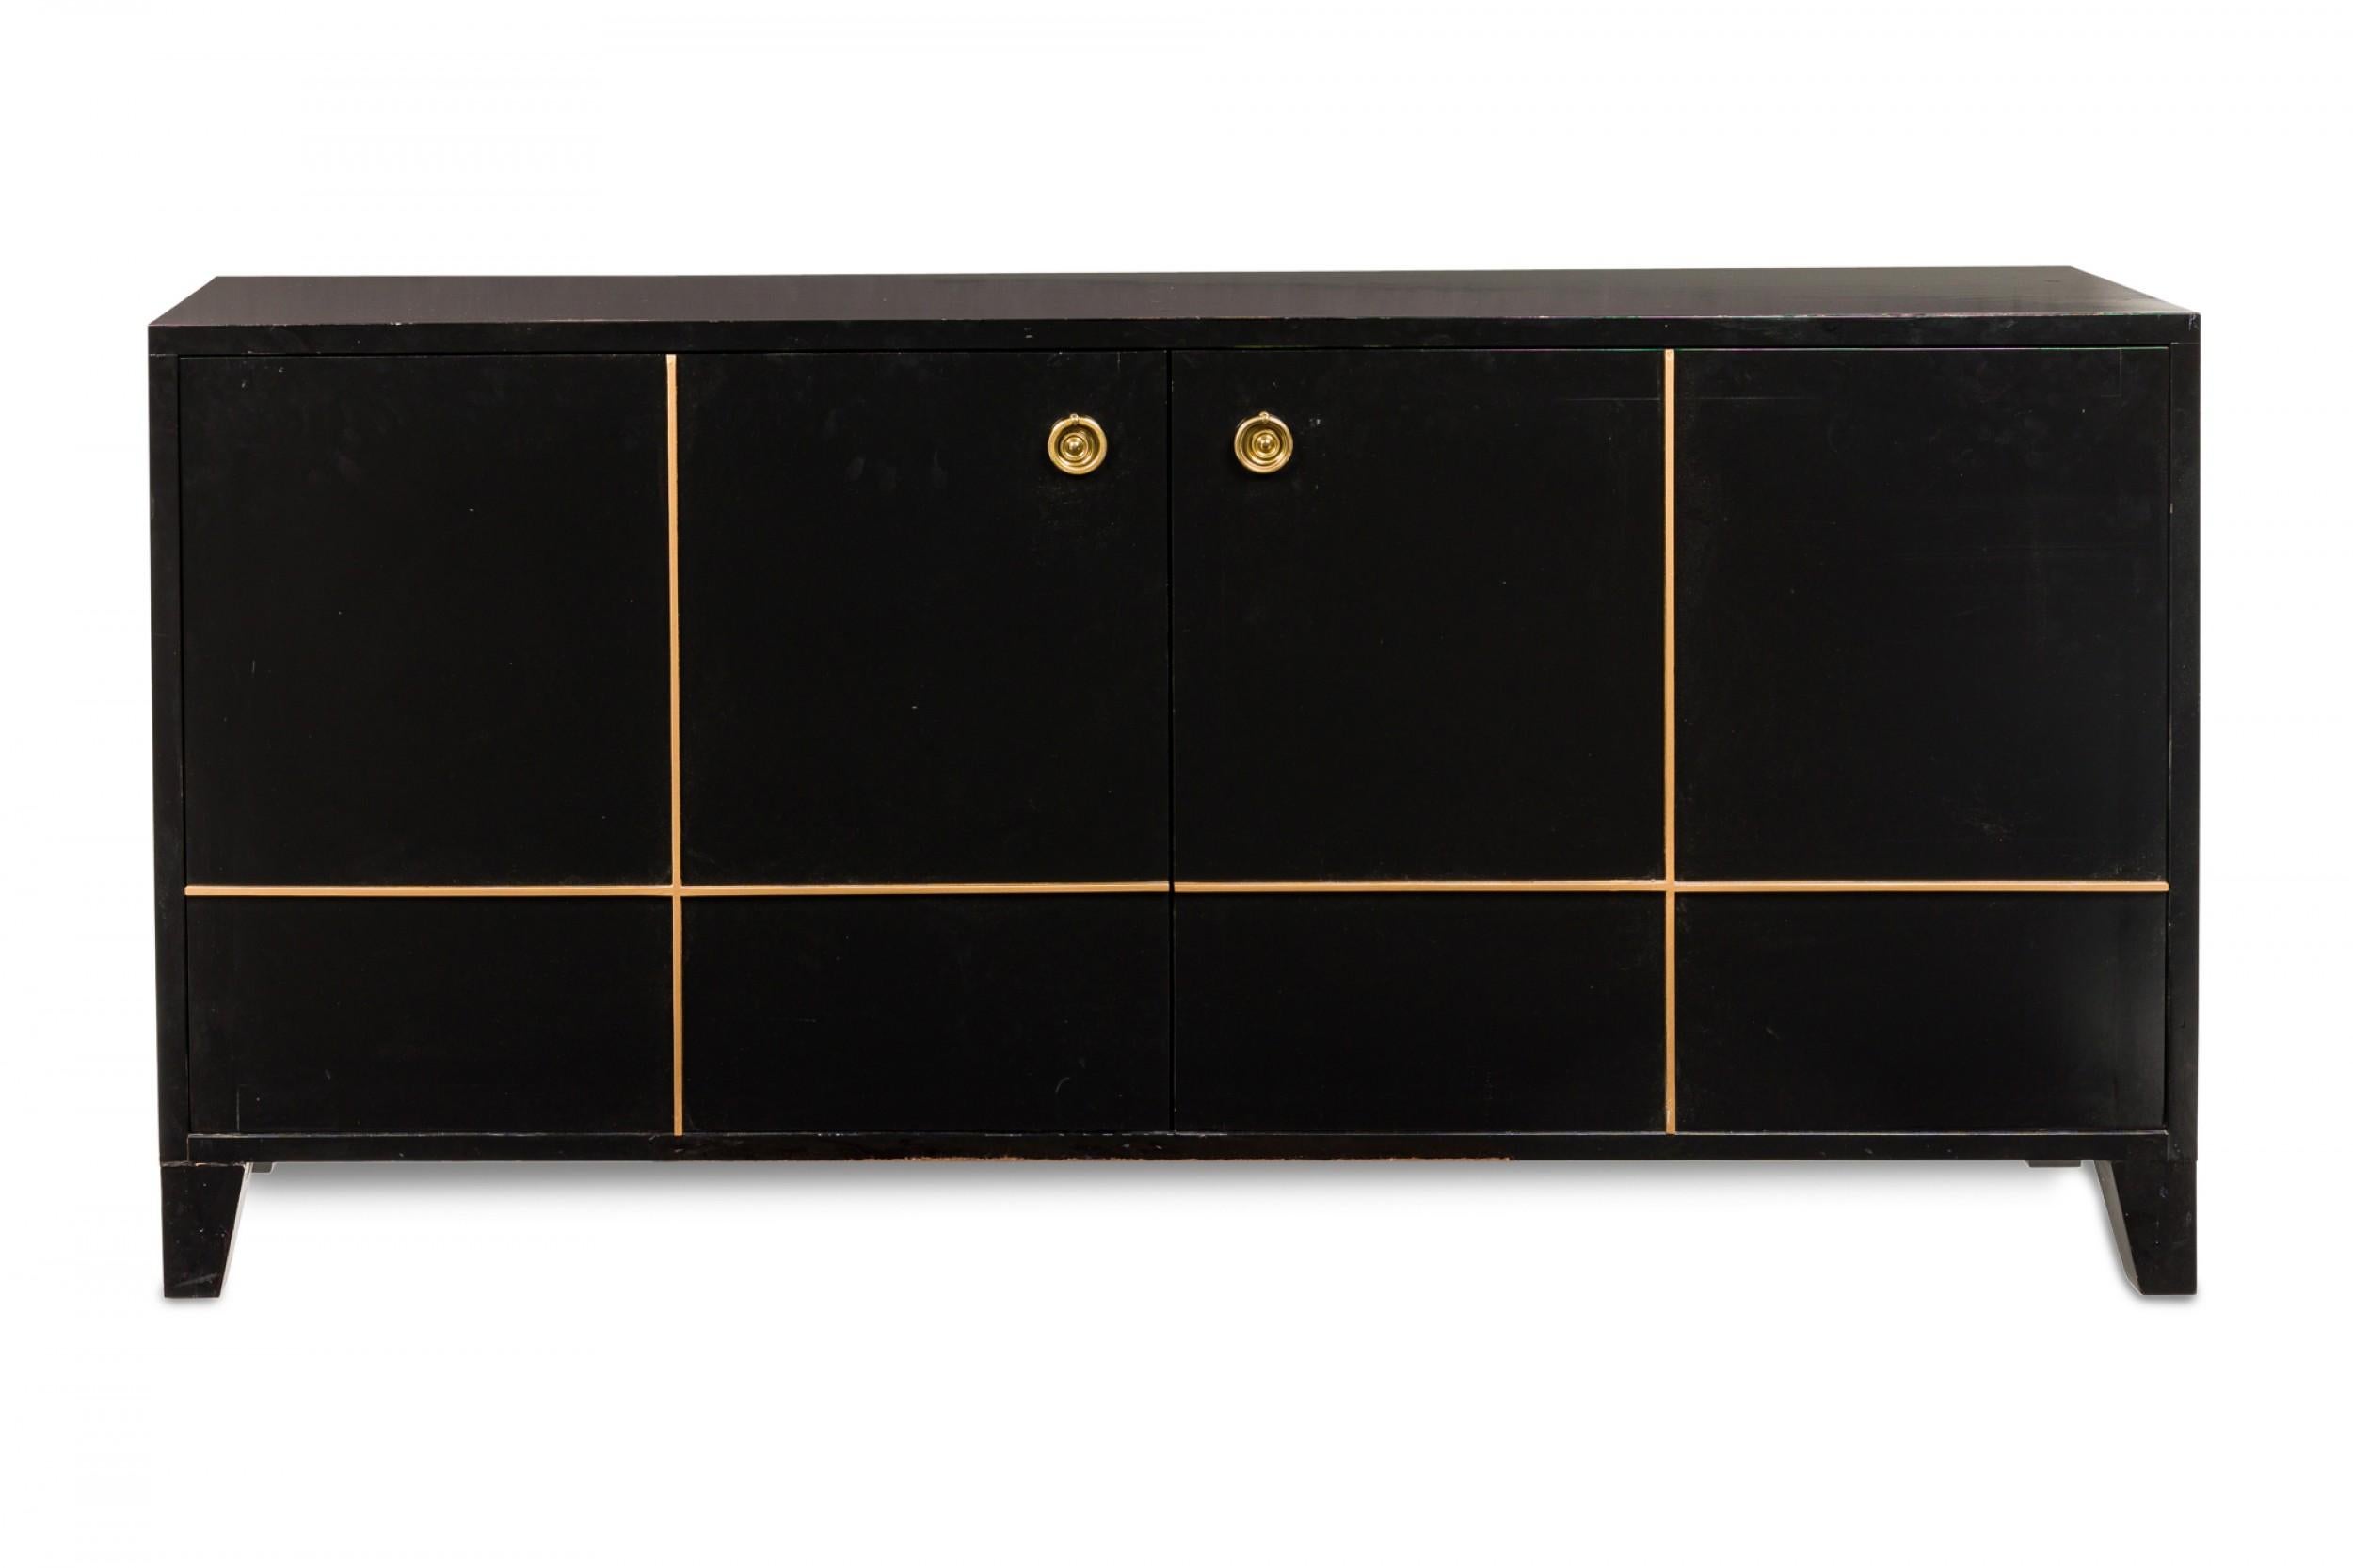 Contemporary American rectangular console cabinet / sideboard with a black painted finish and gilt geometric trim applied to the front, two cabinet doors with circular gilt metal ring handles opening to reveal two interior compartments with four